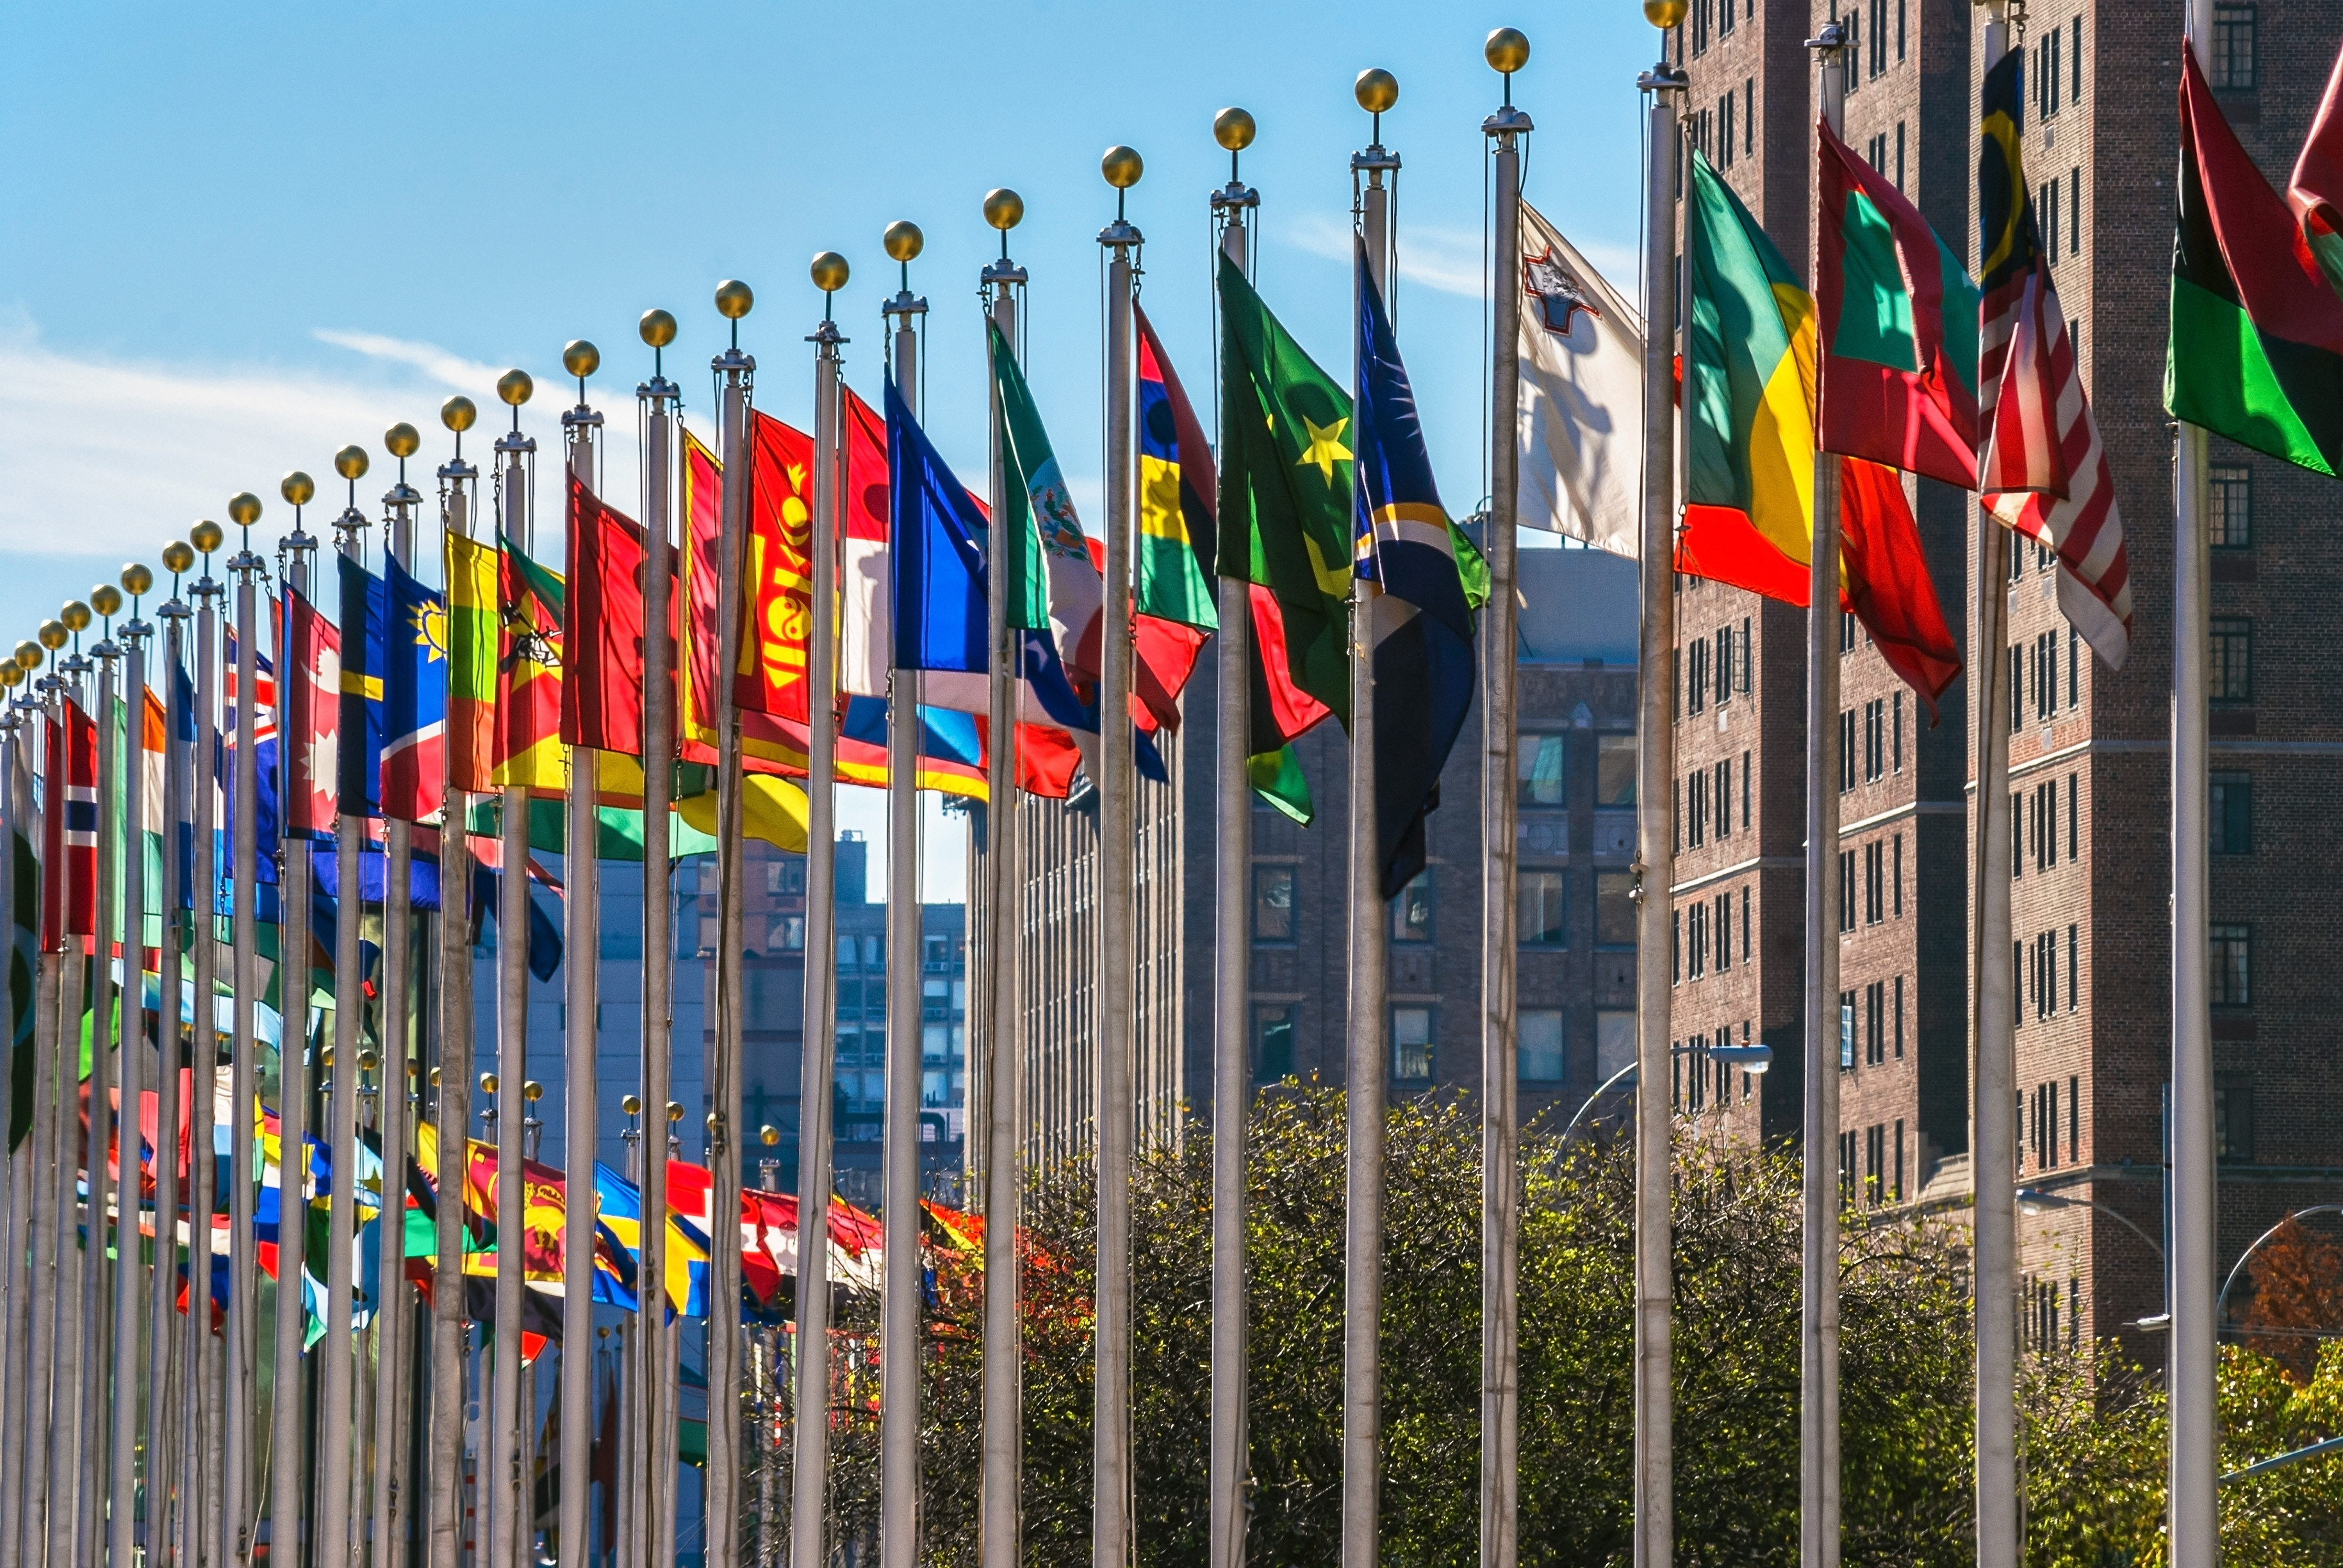 Flags from different countries on pole representing FATF